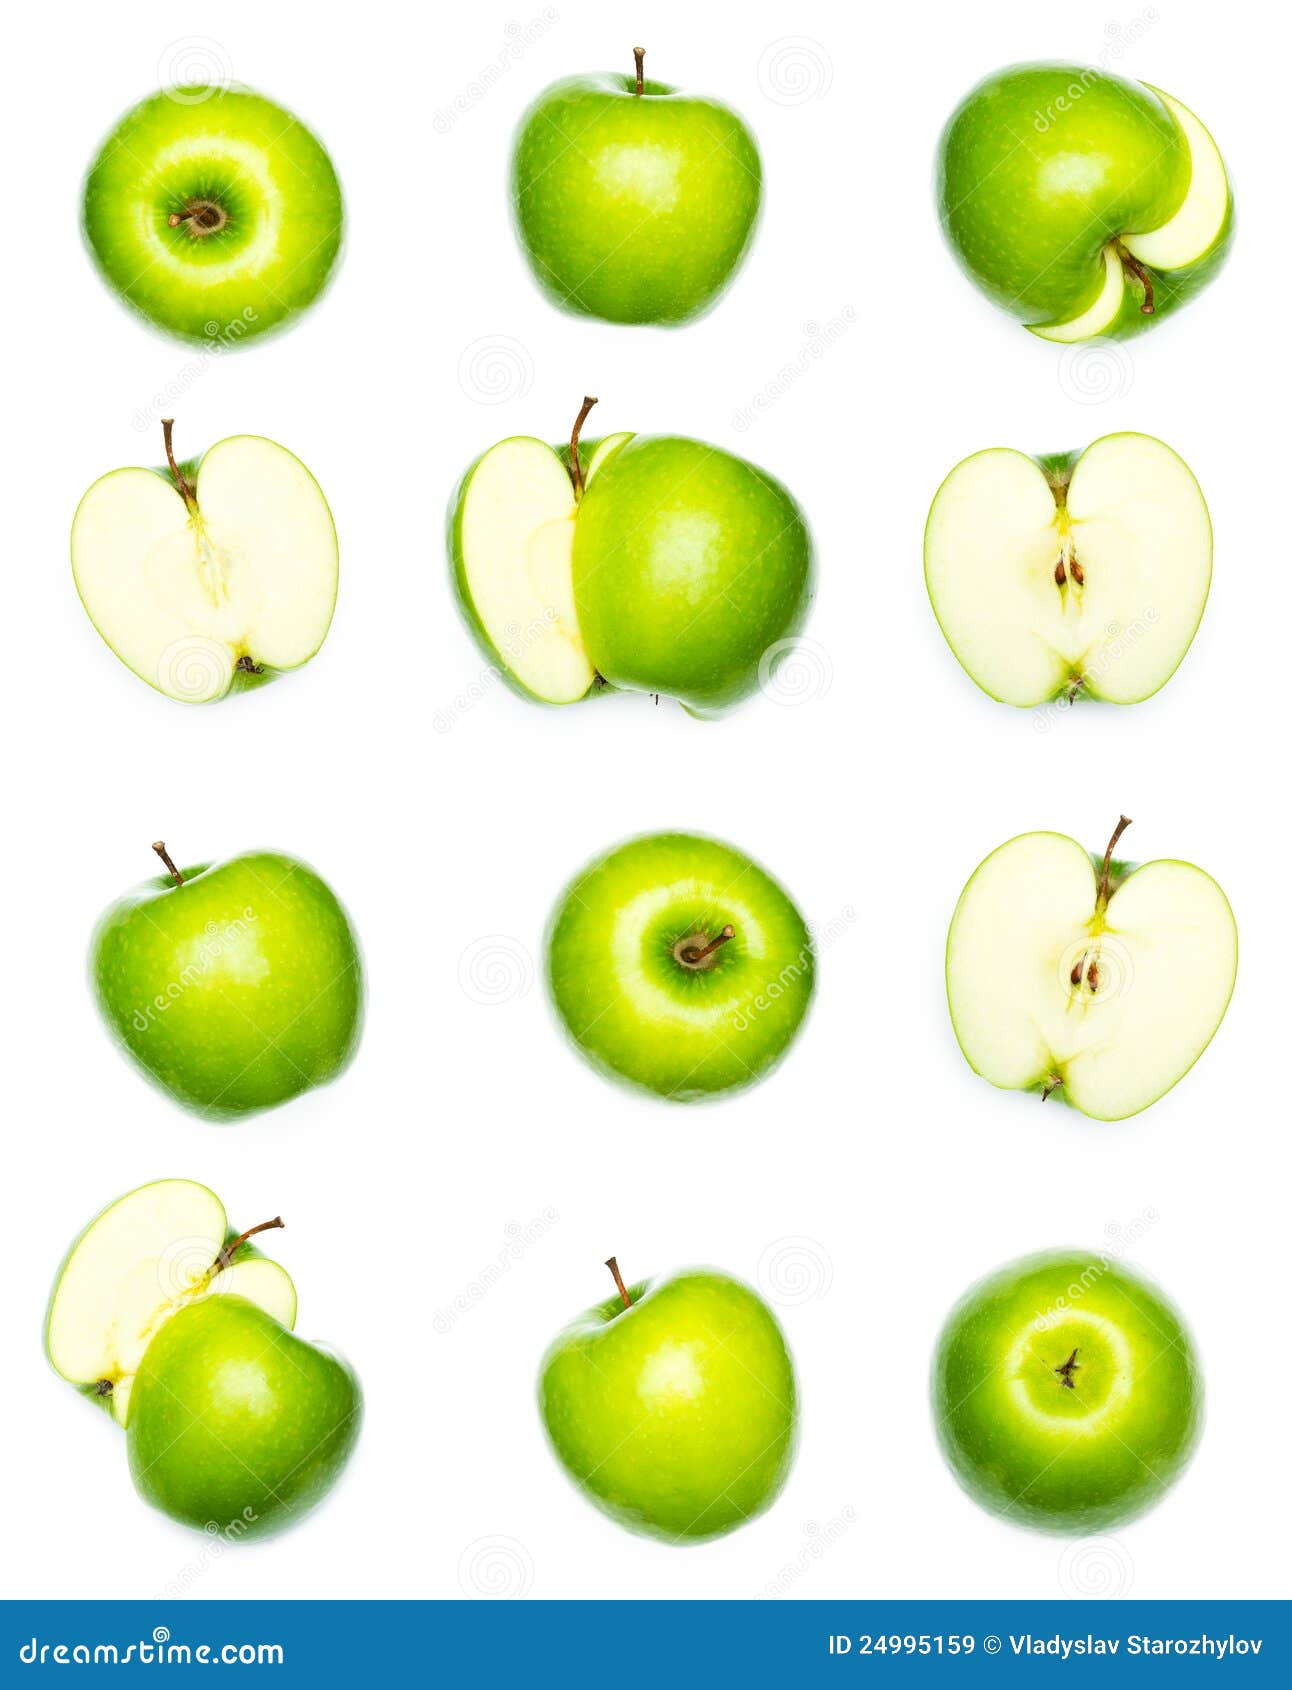 Apples collection stock image. Image of white, healthy - 24995159